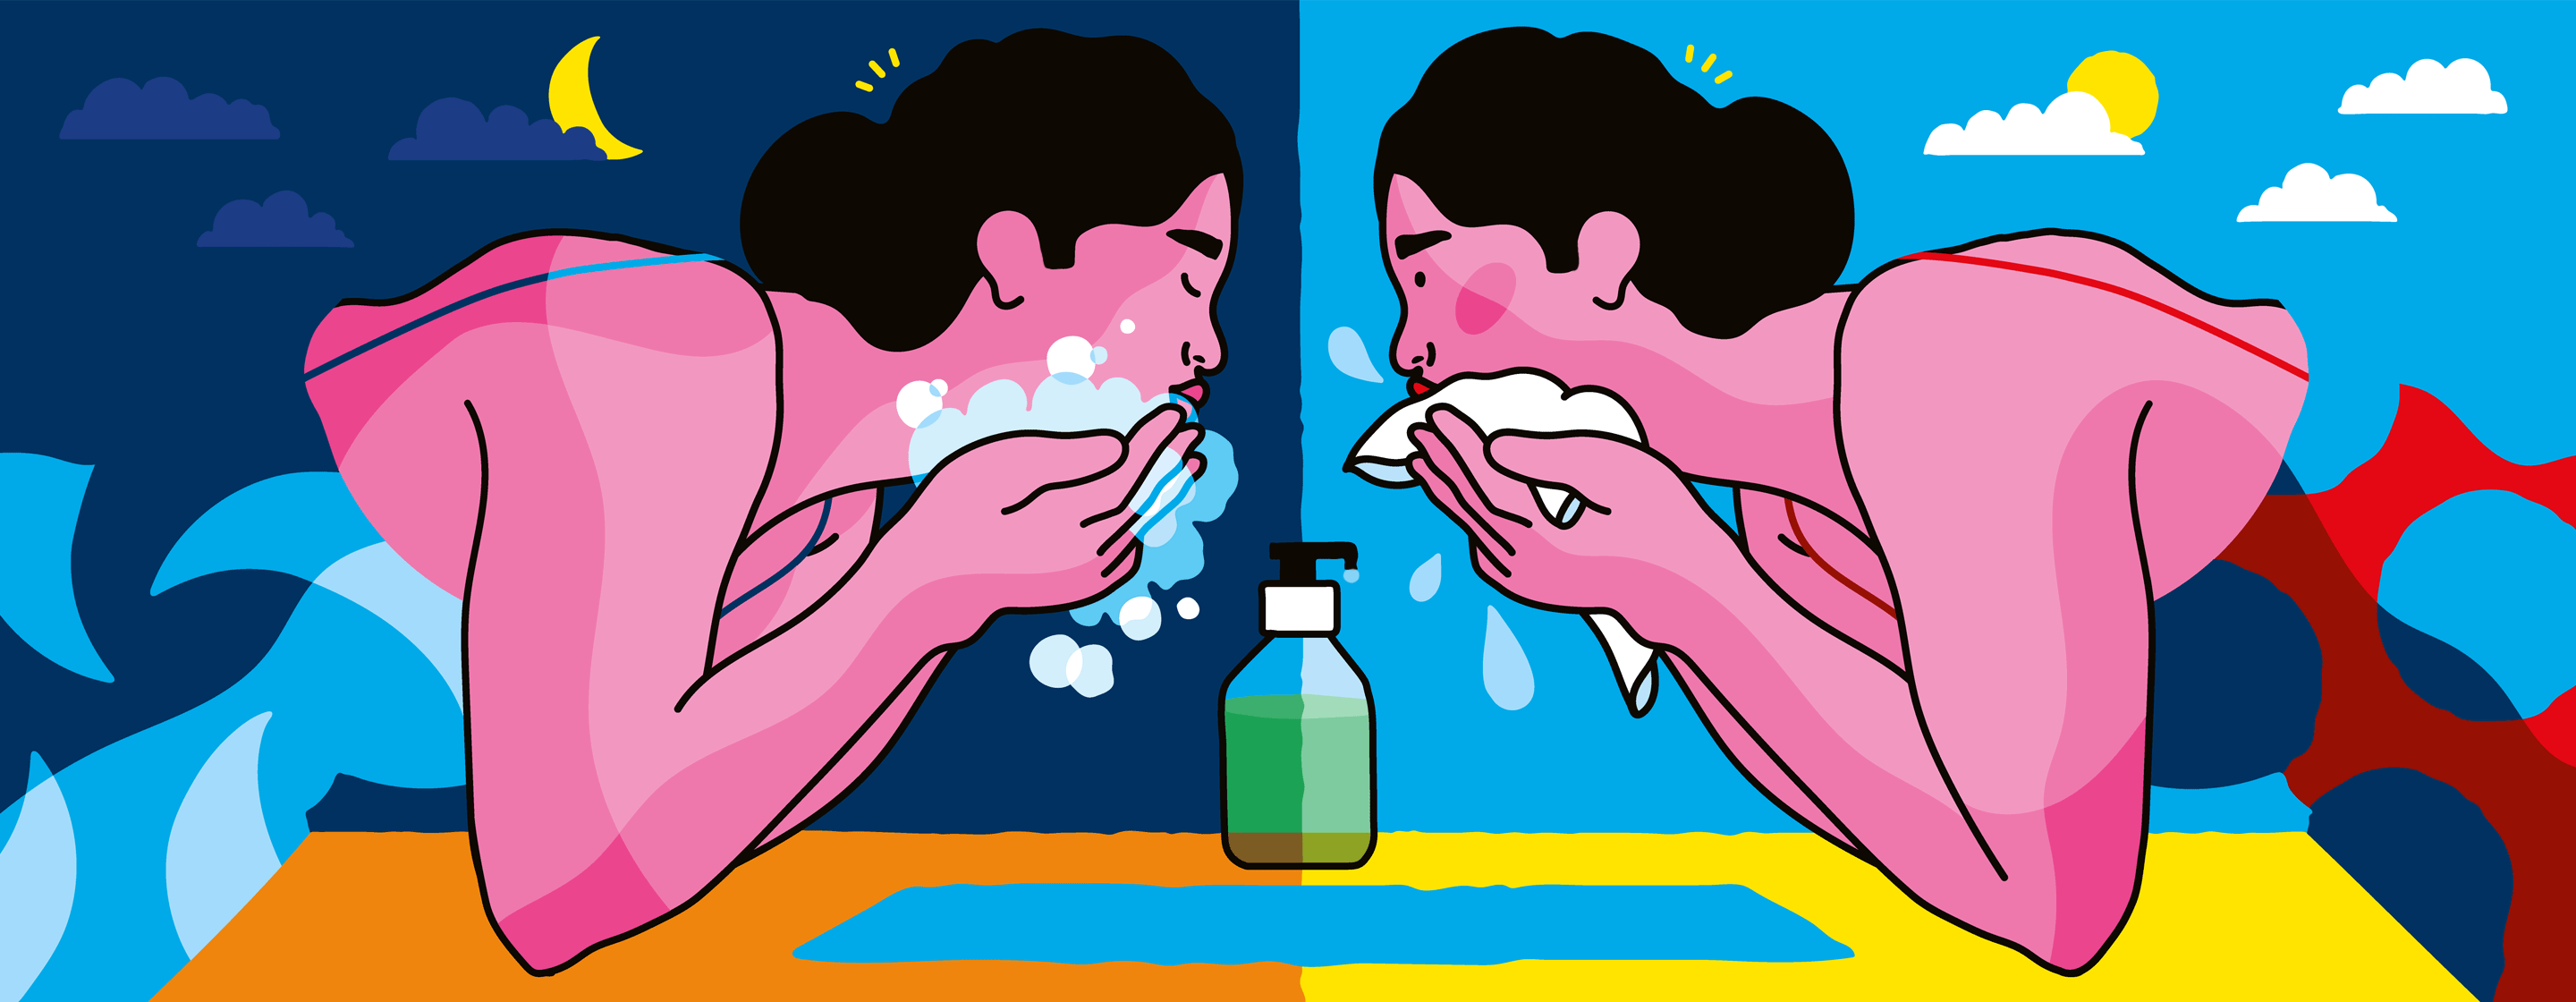 gif_illustration_of_womn_washing_and_drying_her_face_skincare_by_Xaviera_Altena_1440x560.gif